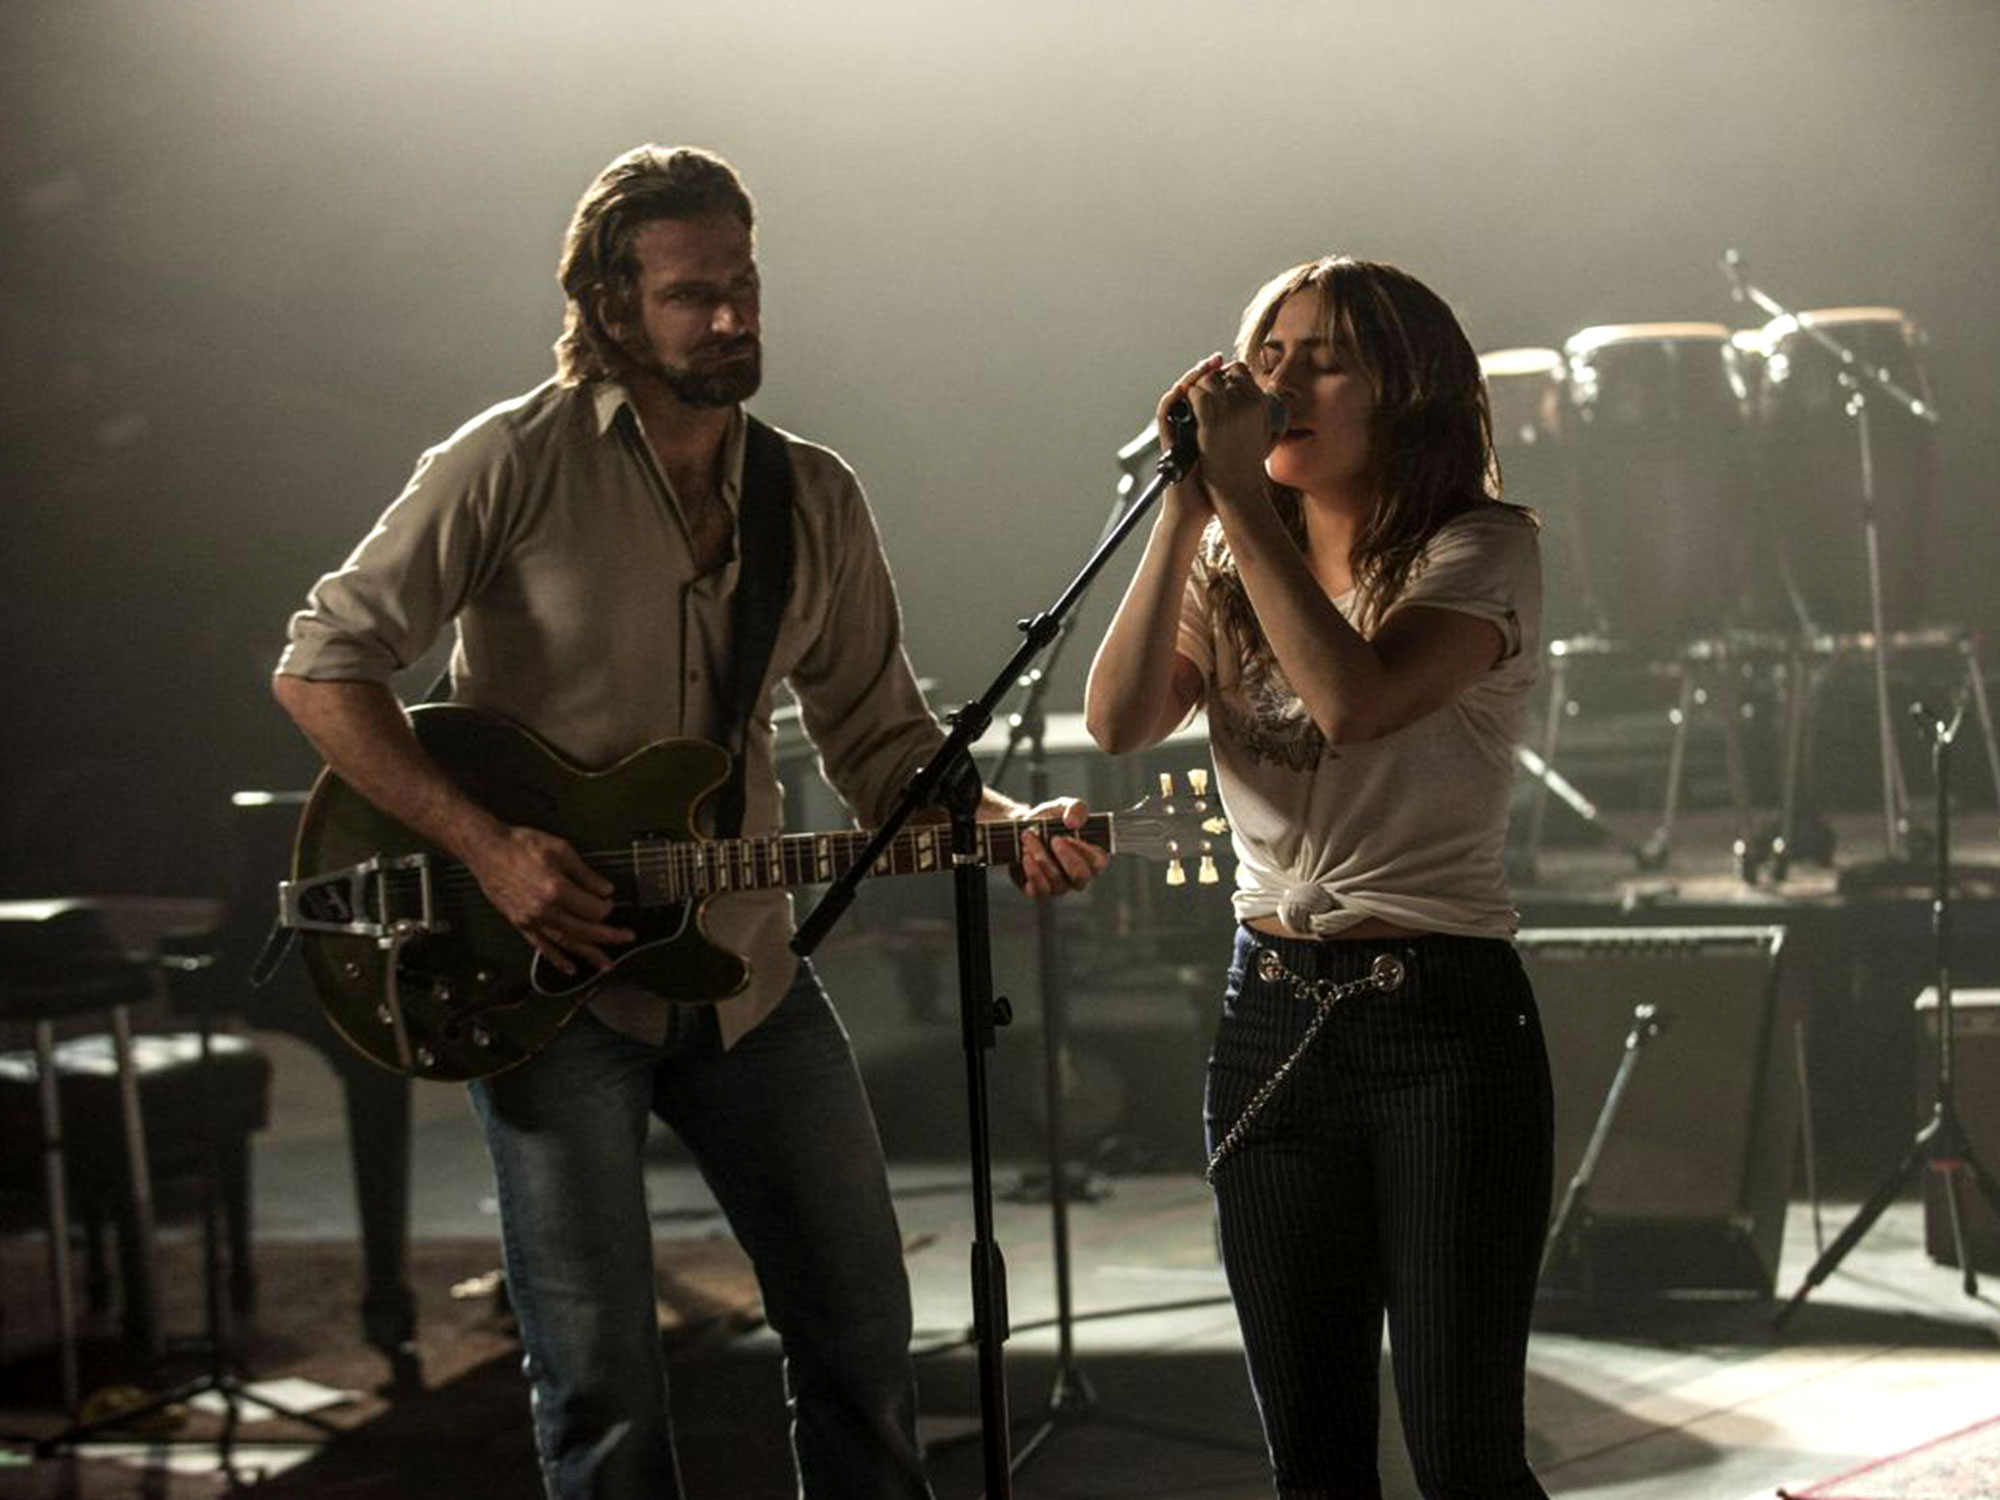 Lady Gaga and Bradley Cooper in A Star is Born